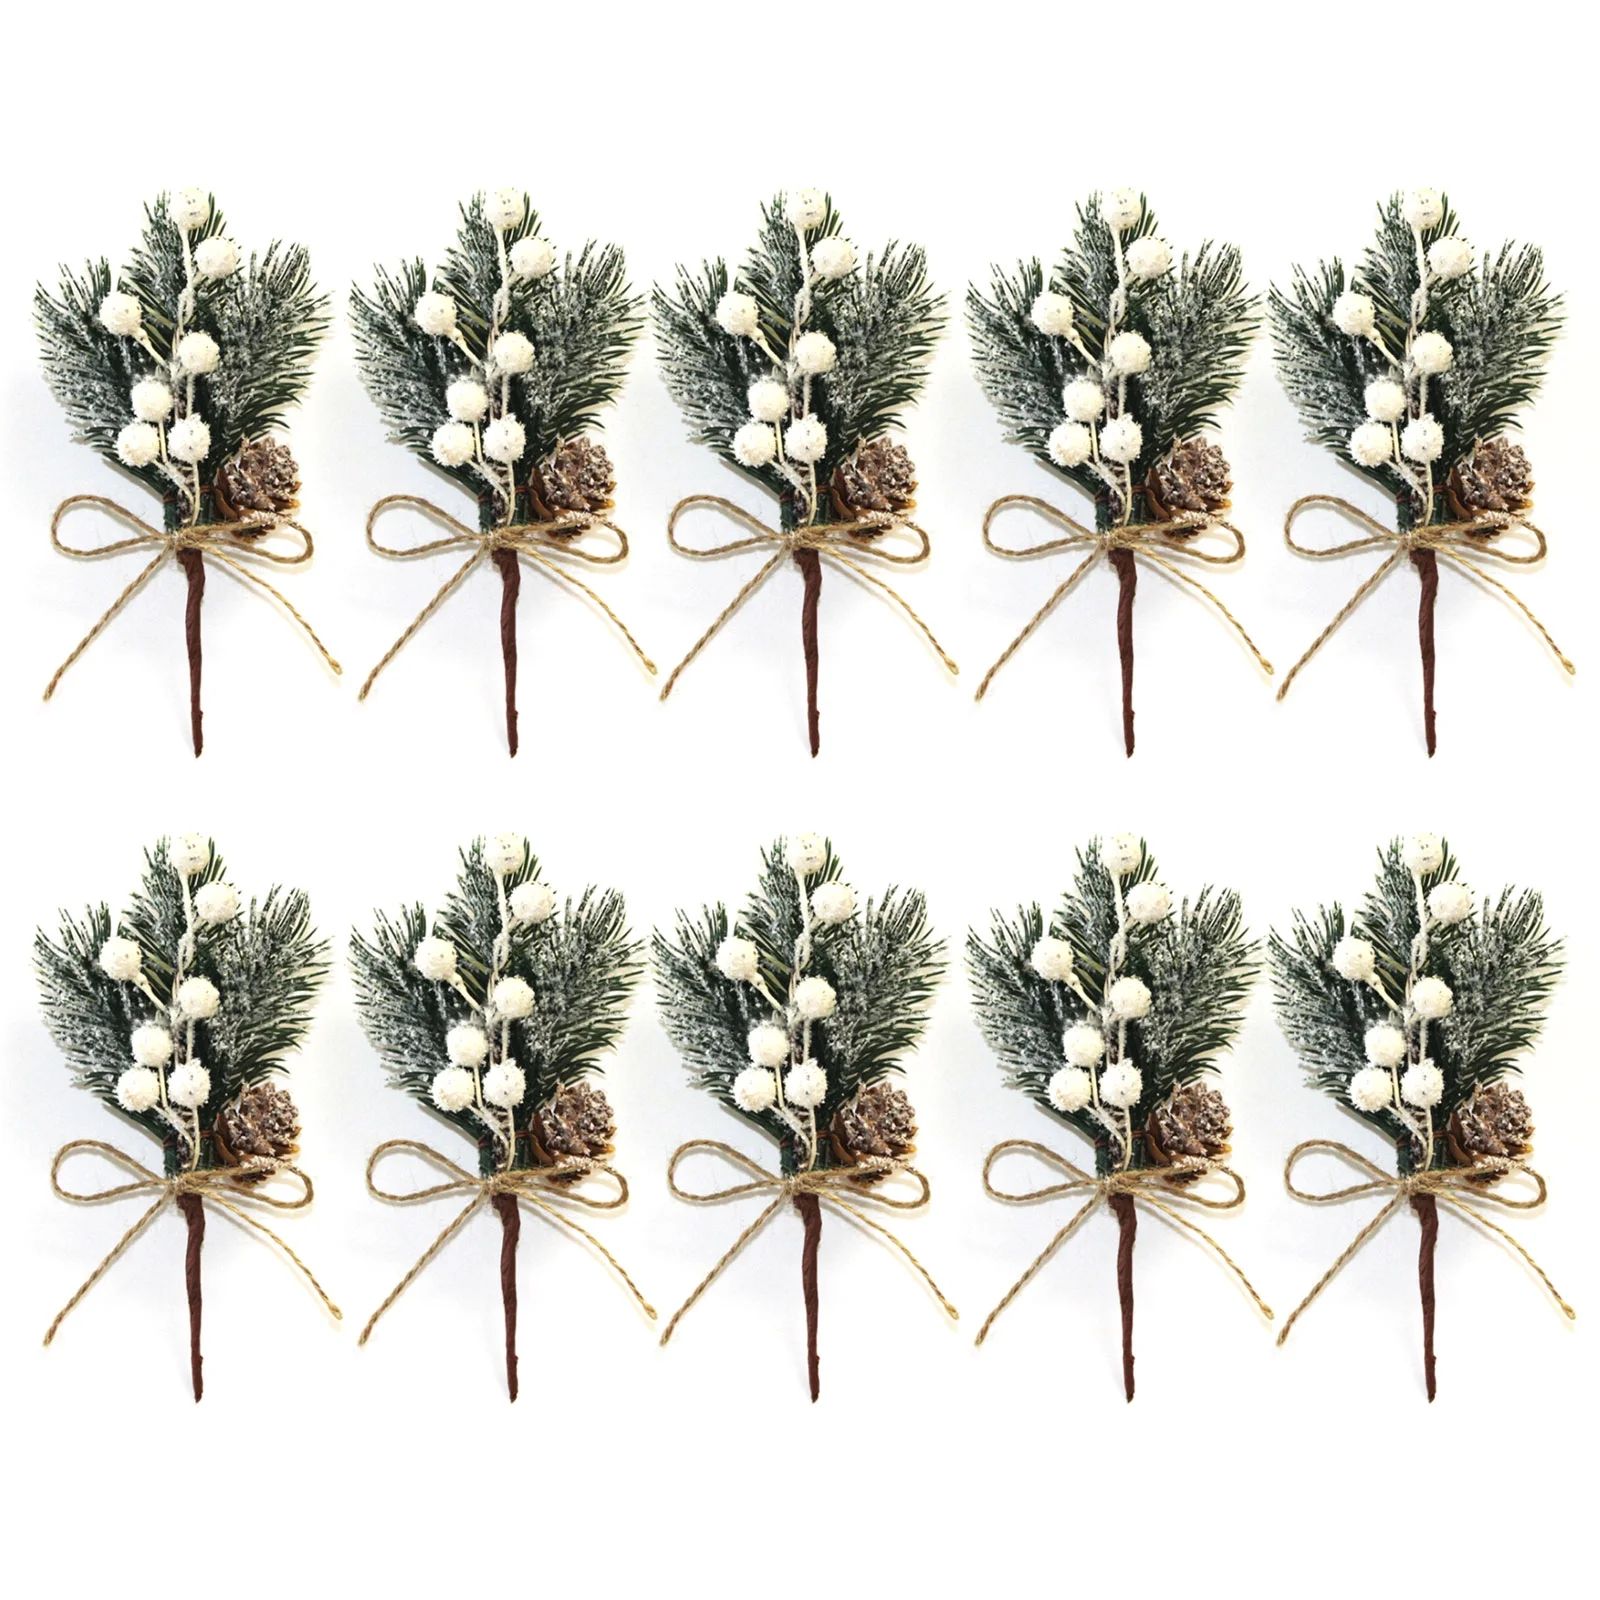 10 PCS Berry Stems Pine Branches Evergreen Christmas Berries Décor Artificial Pine Cones Branch ... | Walmart (US)